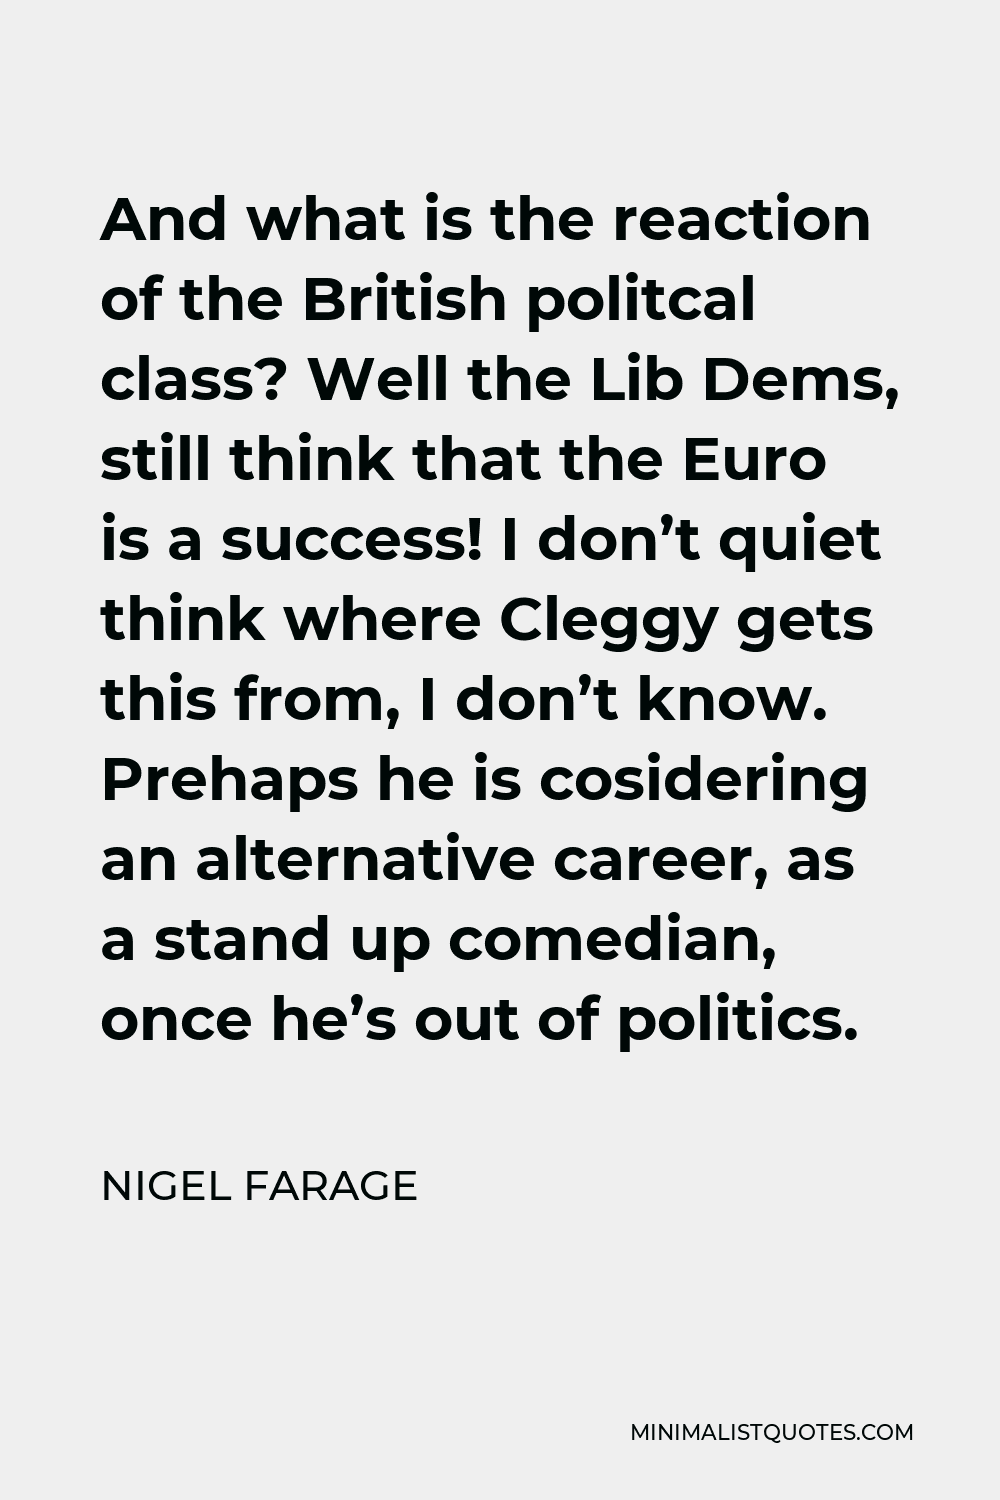 Nigel Farage Quote - And what is the reaction of the British politcal class? Well the Lib Dems, still think that the Euro is a success! I don’t quiet think where Cleggy gets this from, I don’t know. Prehaps he is cosidering an alternative career, as a stand up comedian, once he’s out of politics.